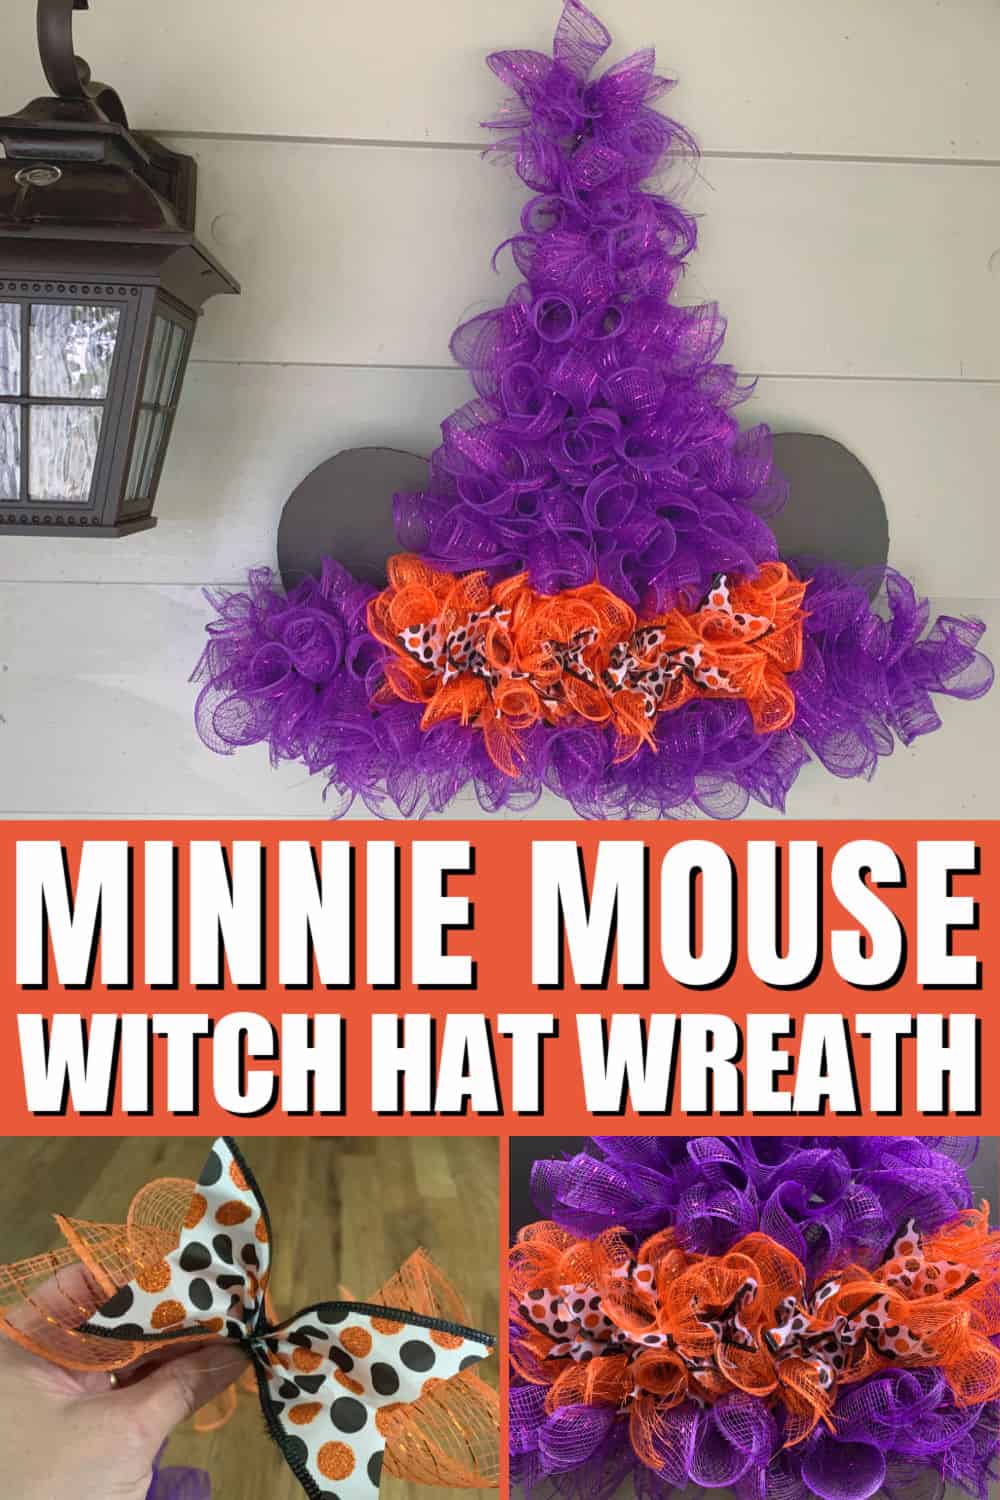 Want a super cute tutorial for a Disney inspired Halloween wreath? From items needed to a thorough step-by-step tutorial, here's how to make an adorable Minnie Mouse witch hat wreath! #DisneyDIY #DisneyHalloween #MinnieEars #MinnieMouseDIY #WitchHatWreath 